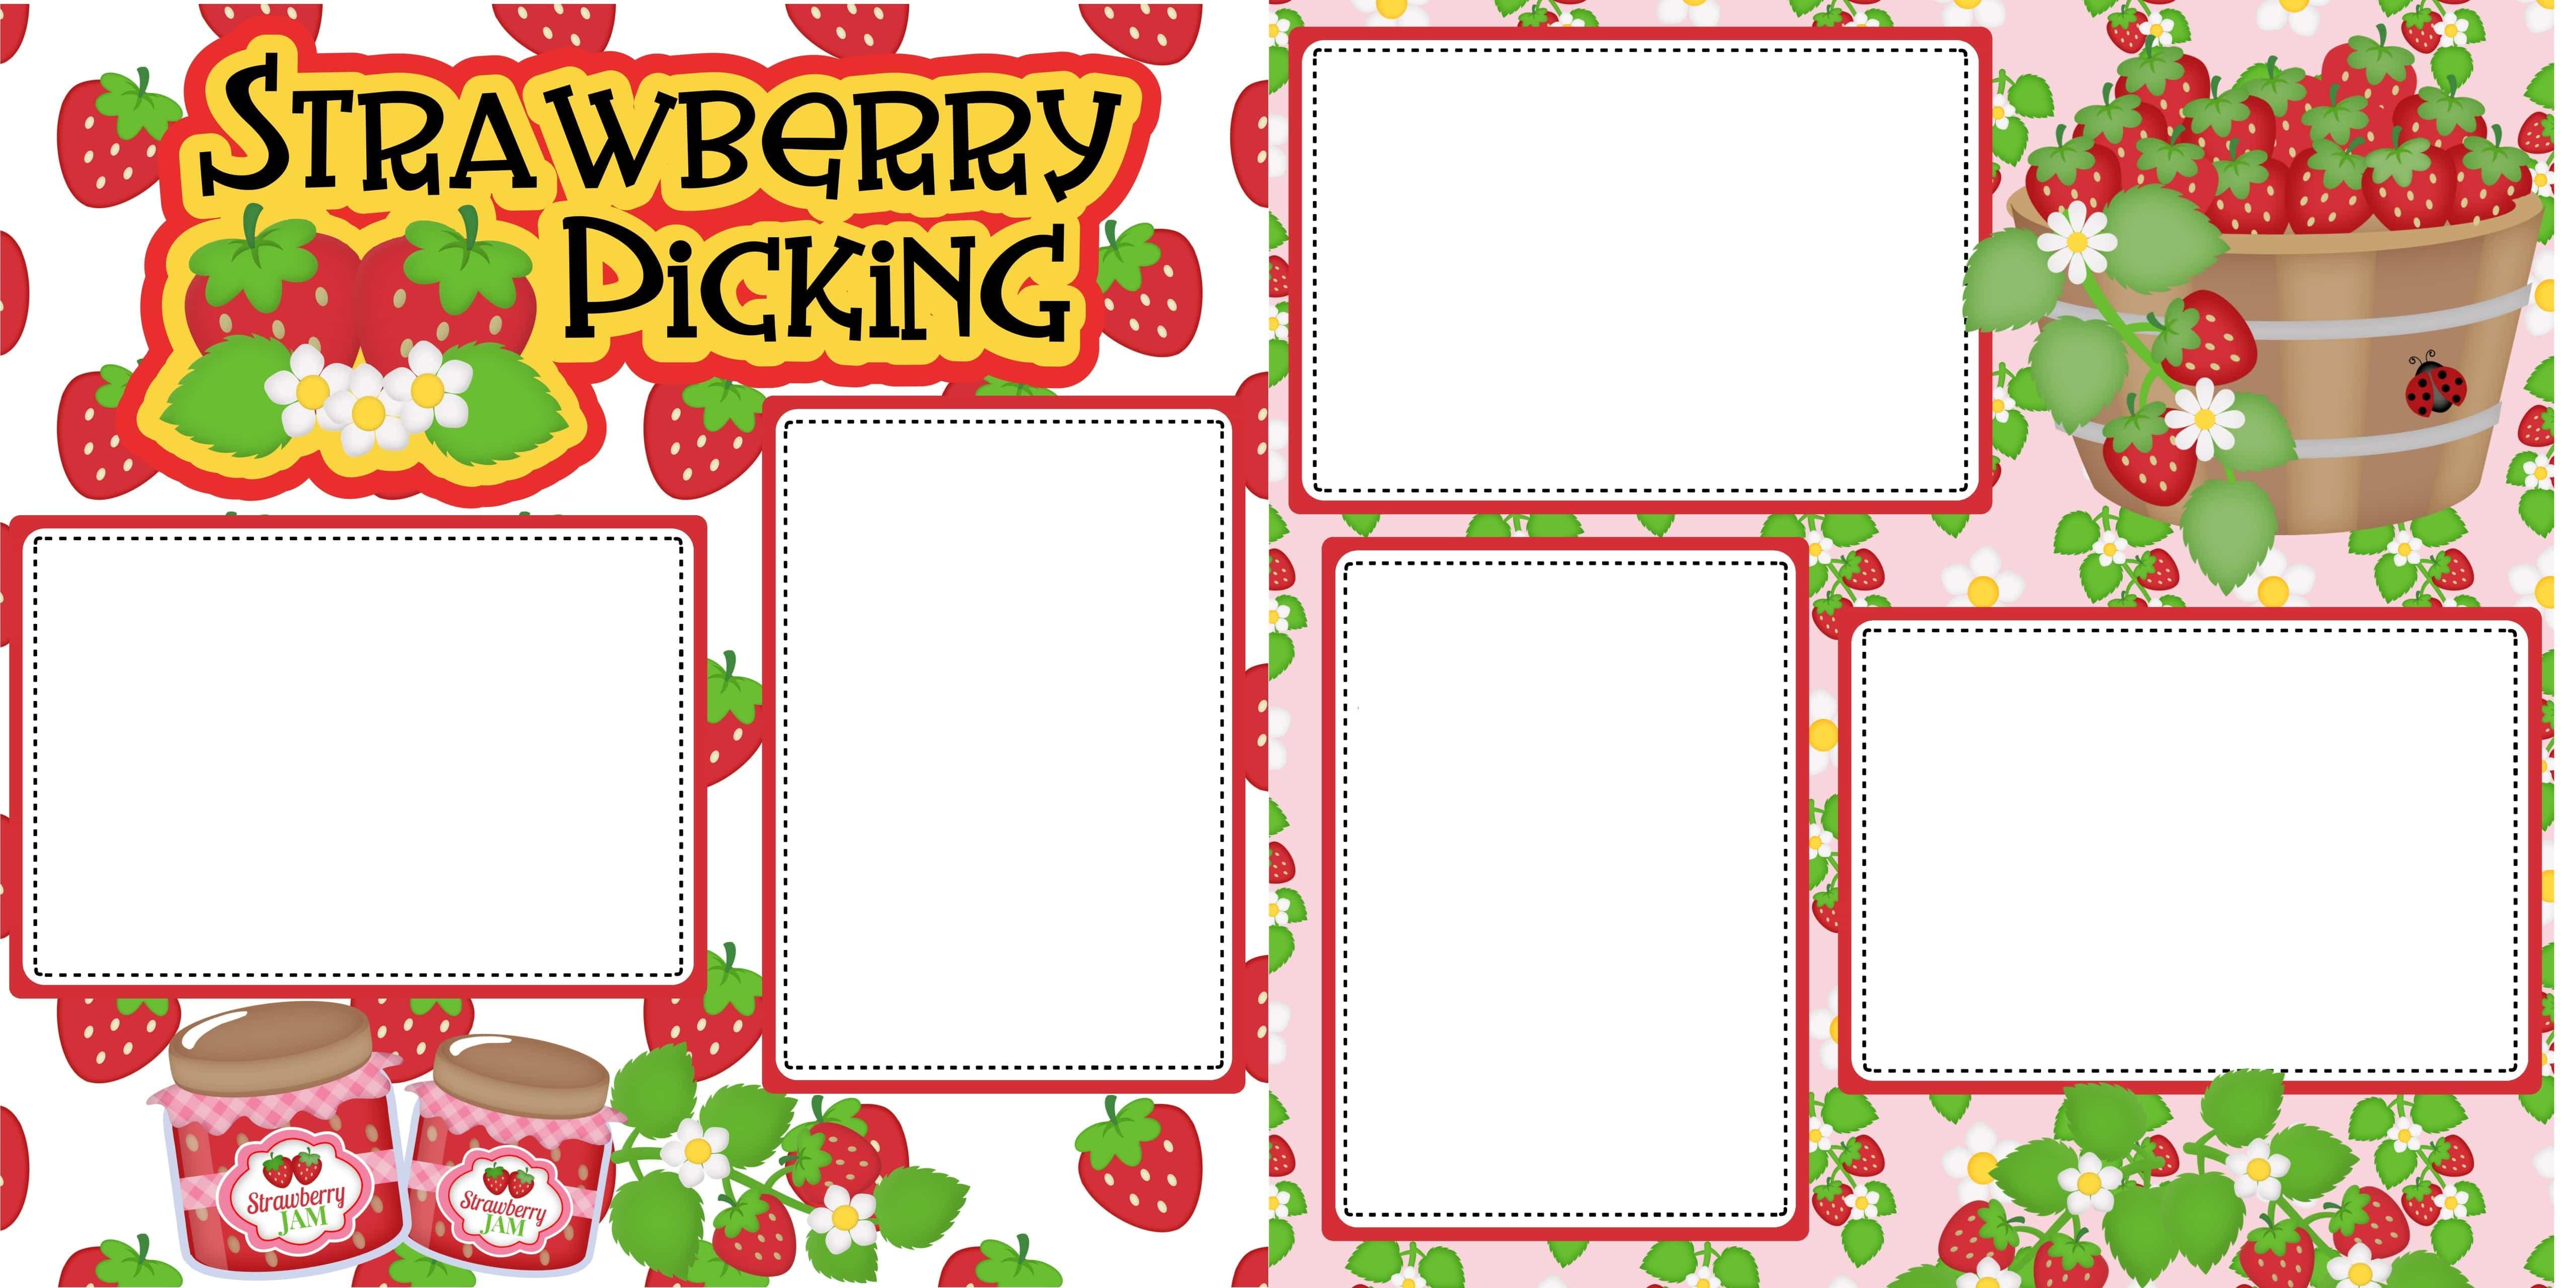 Picking Strawberries (2) - 12 x 12 Premade, Printed Scrapbook Pages by SSC Designs